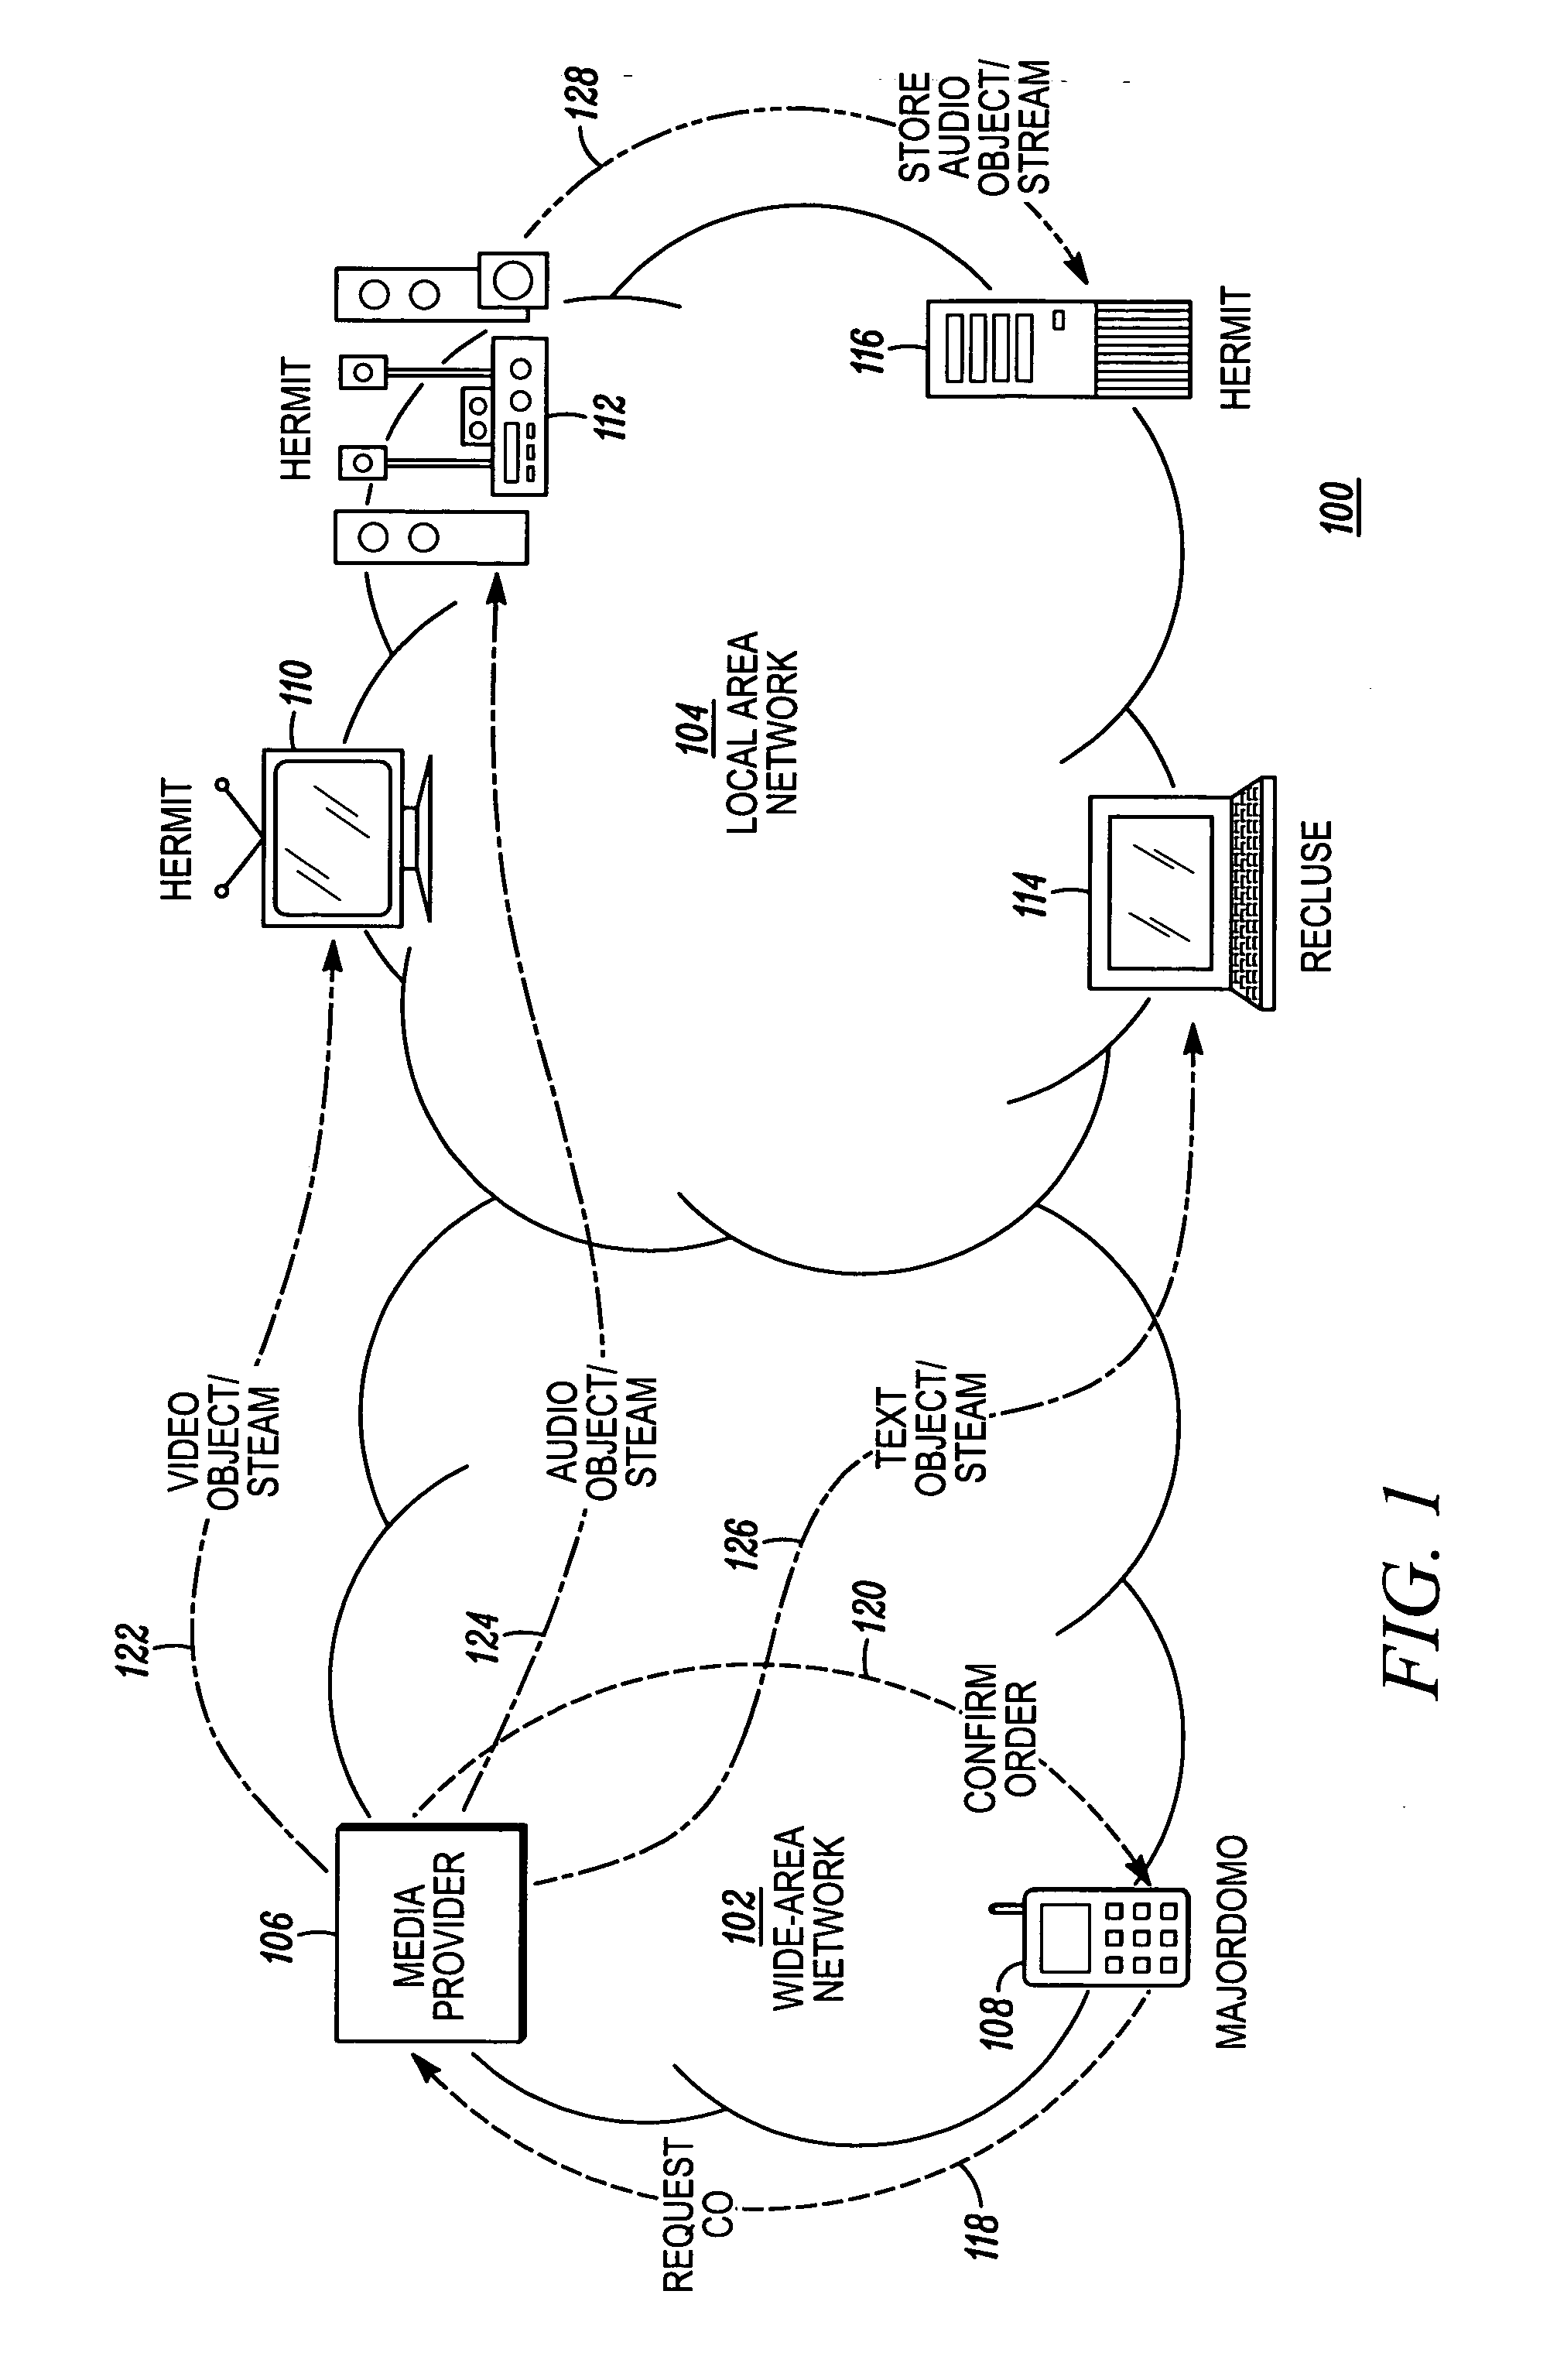 Privacy proxy of a digital security system for distributing media content to a local area network